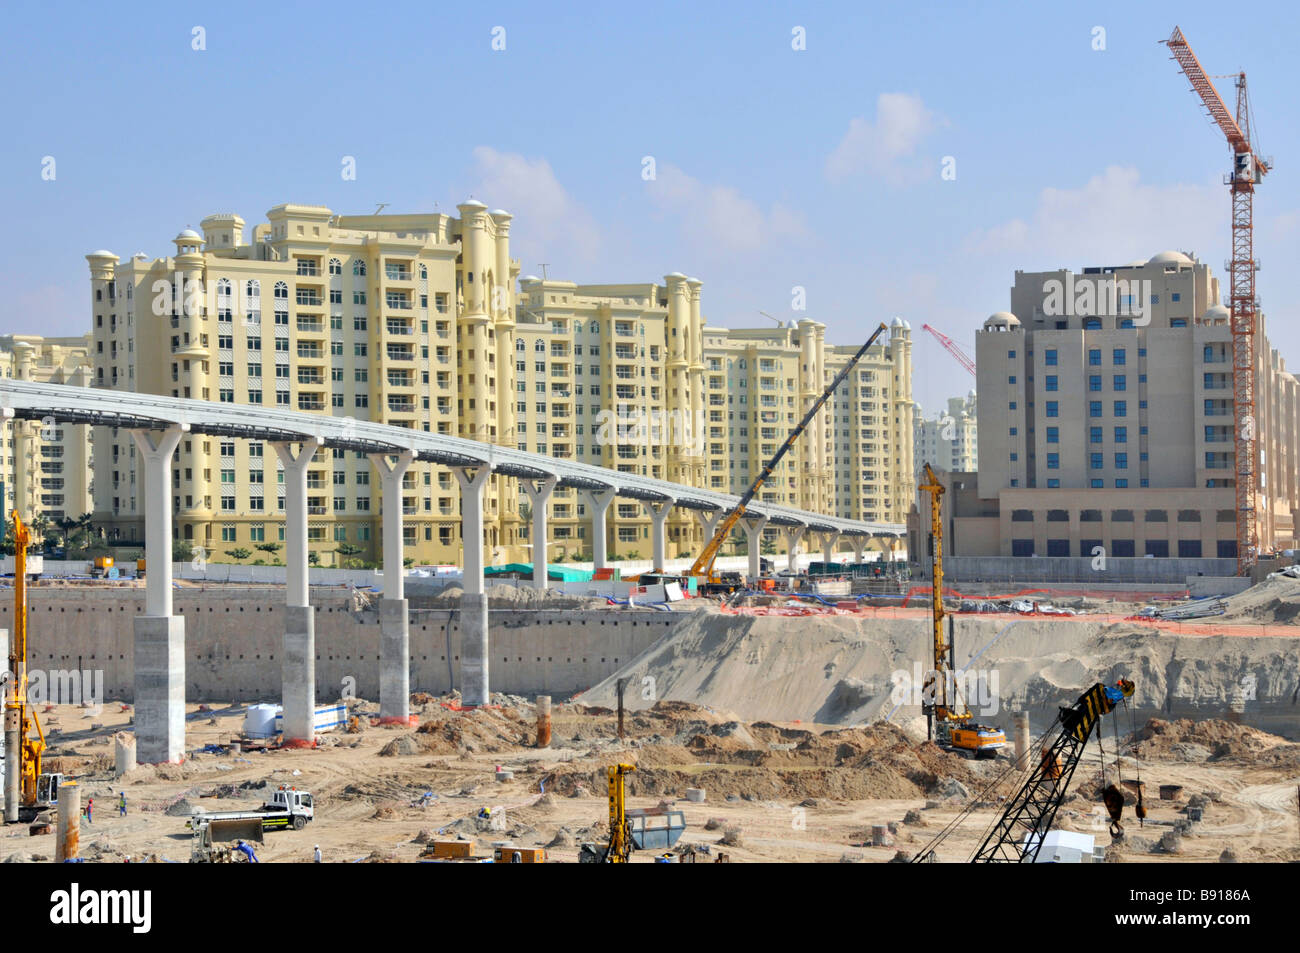 Dubai artificial Palm Island development site below and around overhead monorail viaduct which will link to new metro service Stock Photo